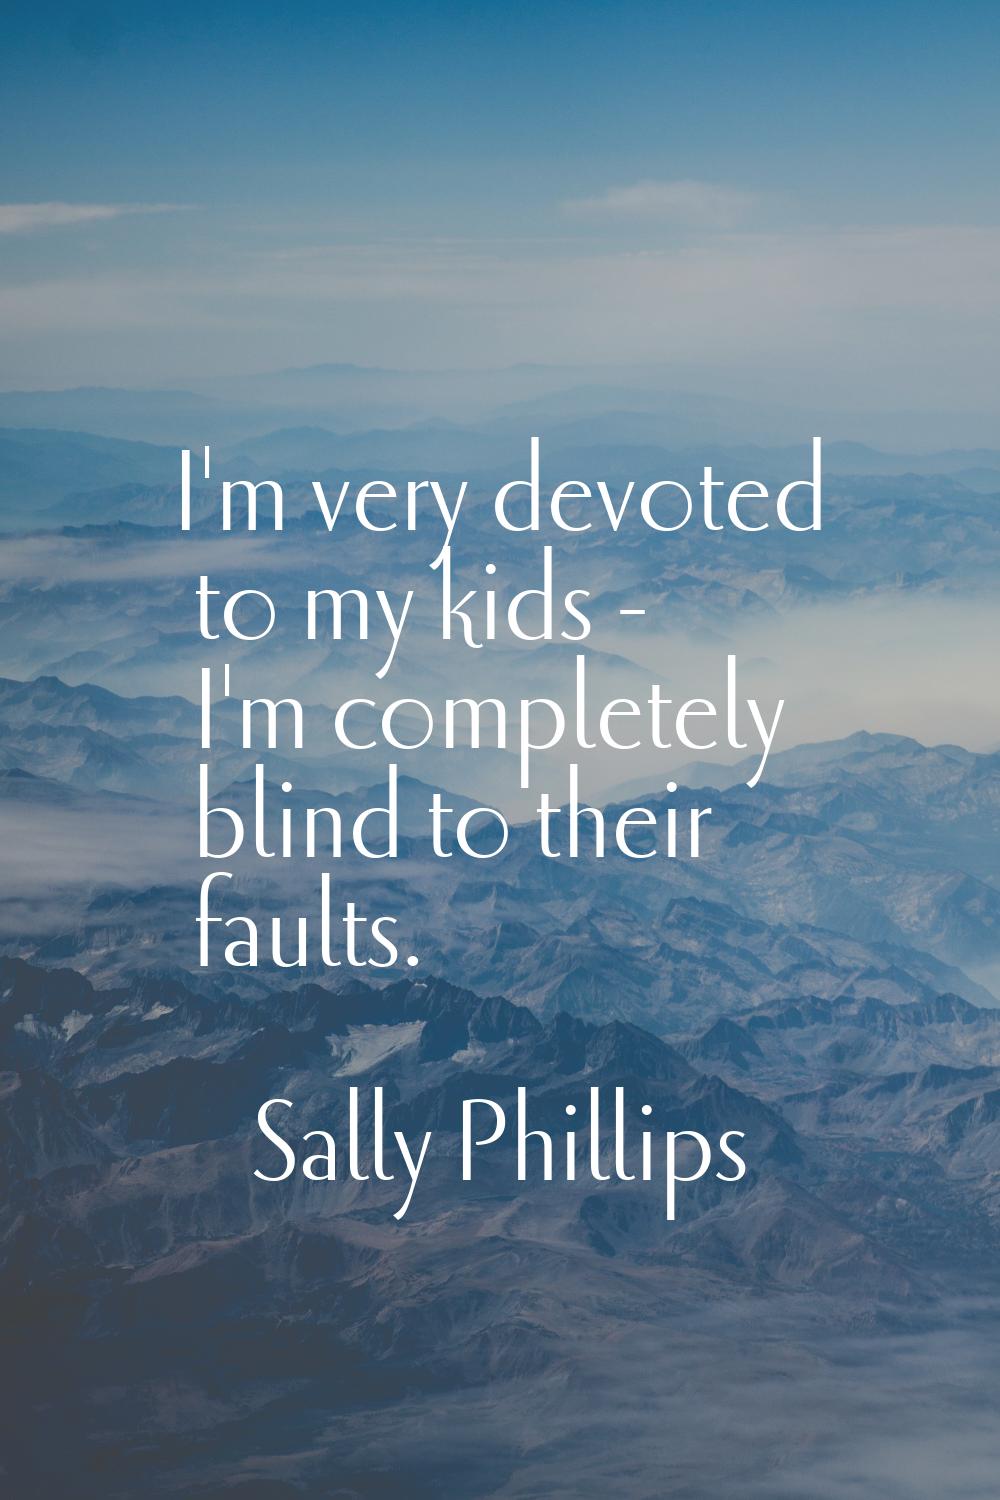 I'm very devoted to my kids - I'm completely blind to their faults.